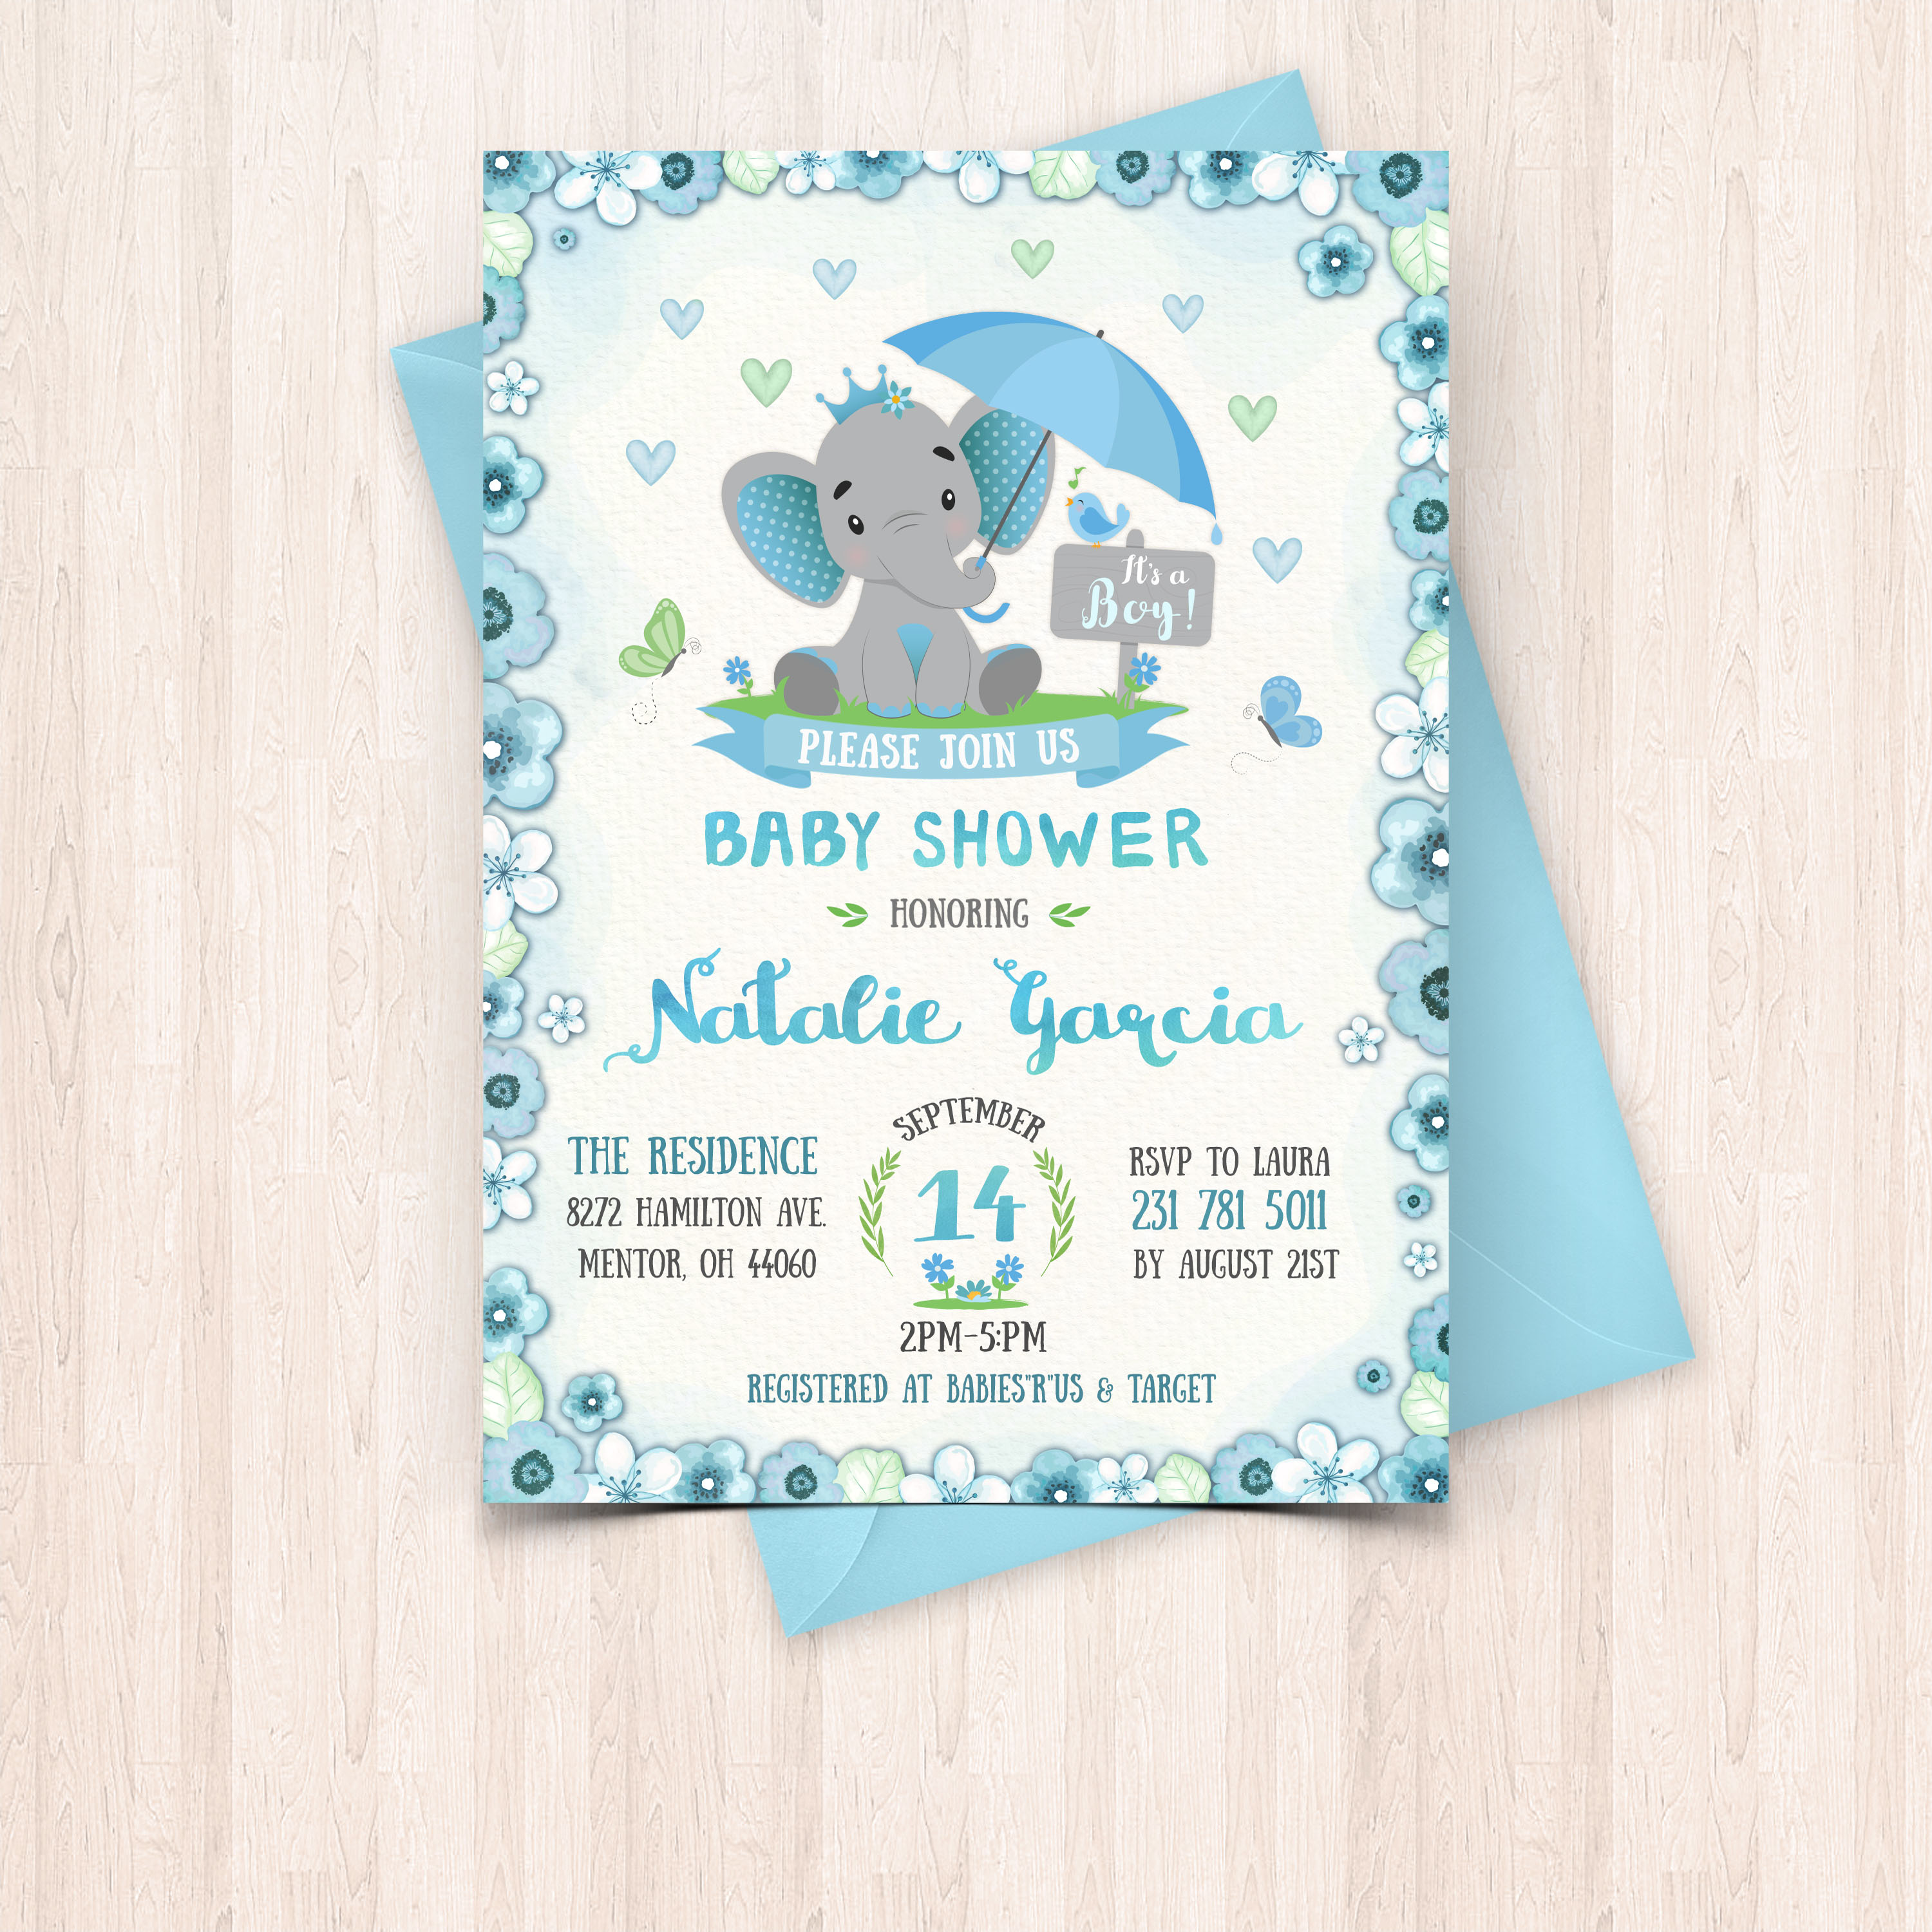 Full Size of Baby Shower:inspirational Elephant Baby Shower Invitations Photo Concepts Baby Shower For Men With Baby Shower Messages Plus Baby Shower Theme Ideas Together With Baby Shower Sencillo As Well As Baby Shower Favors